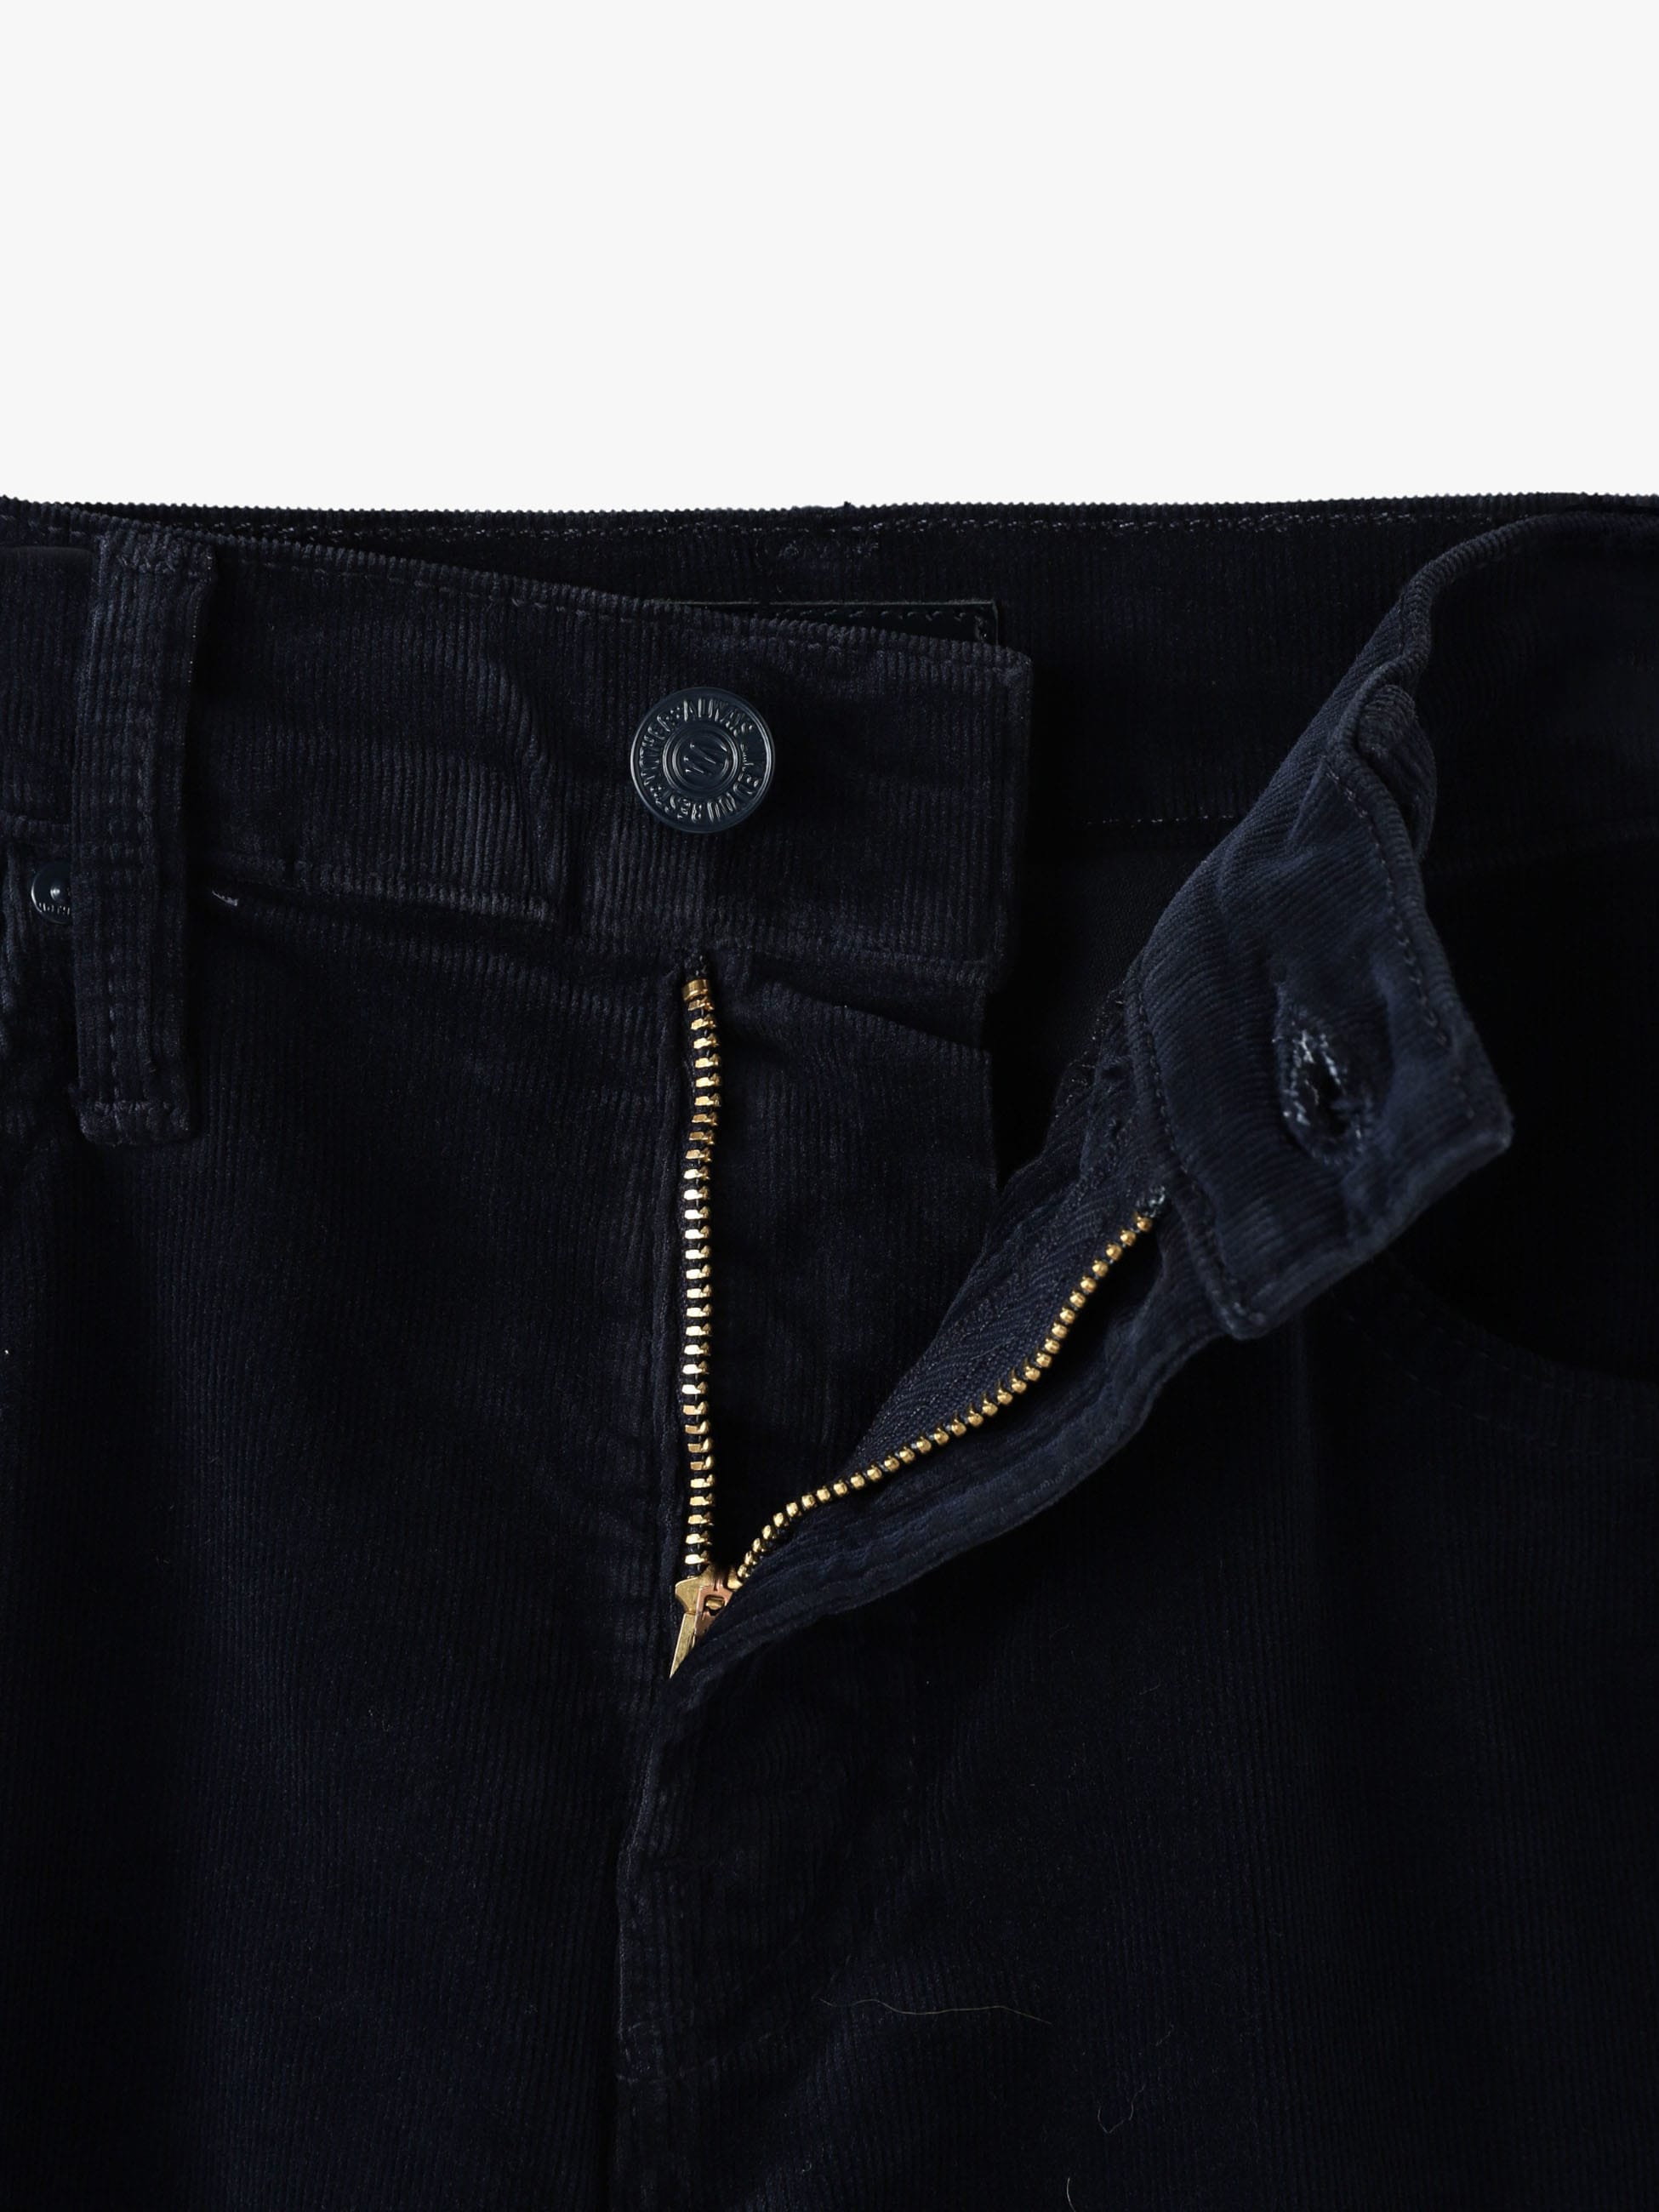 The Mid Rise Rider Ankle Corduroy Pants｜MOTHER(マザー)｜Ron Herman